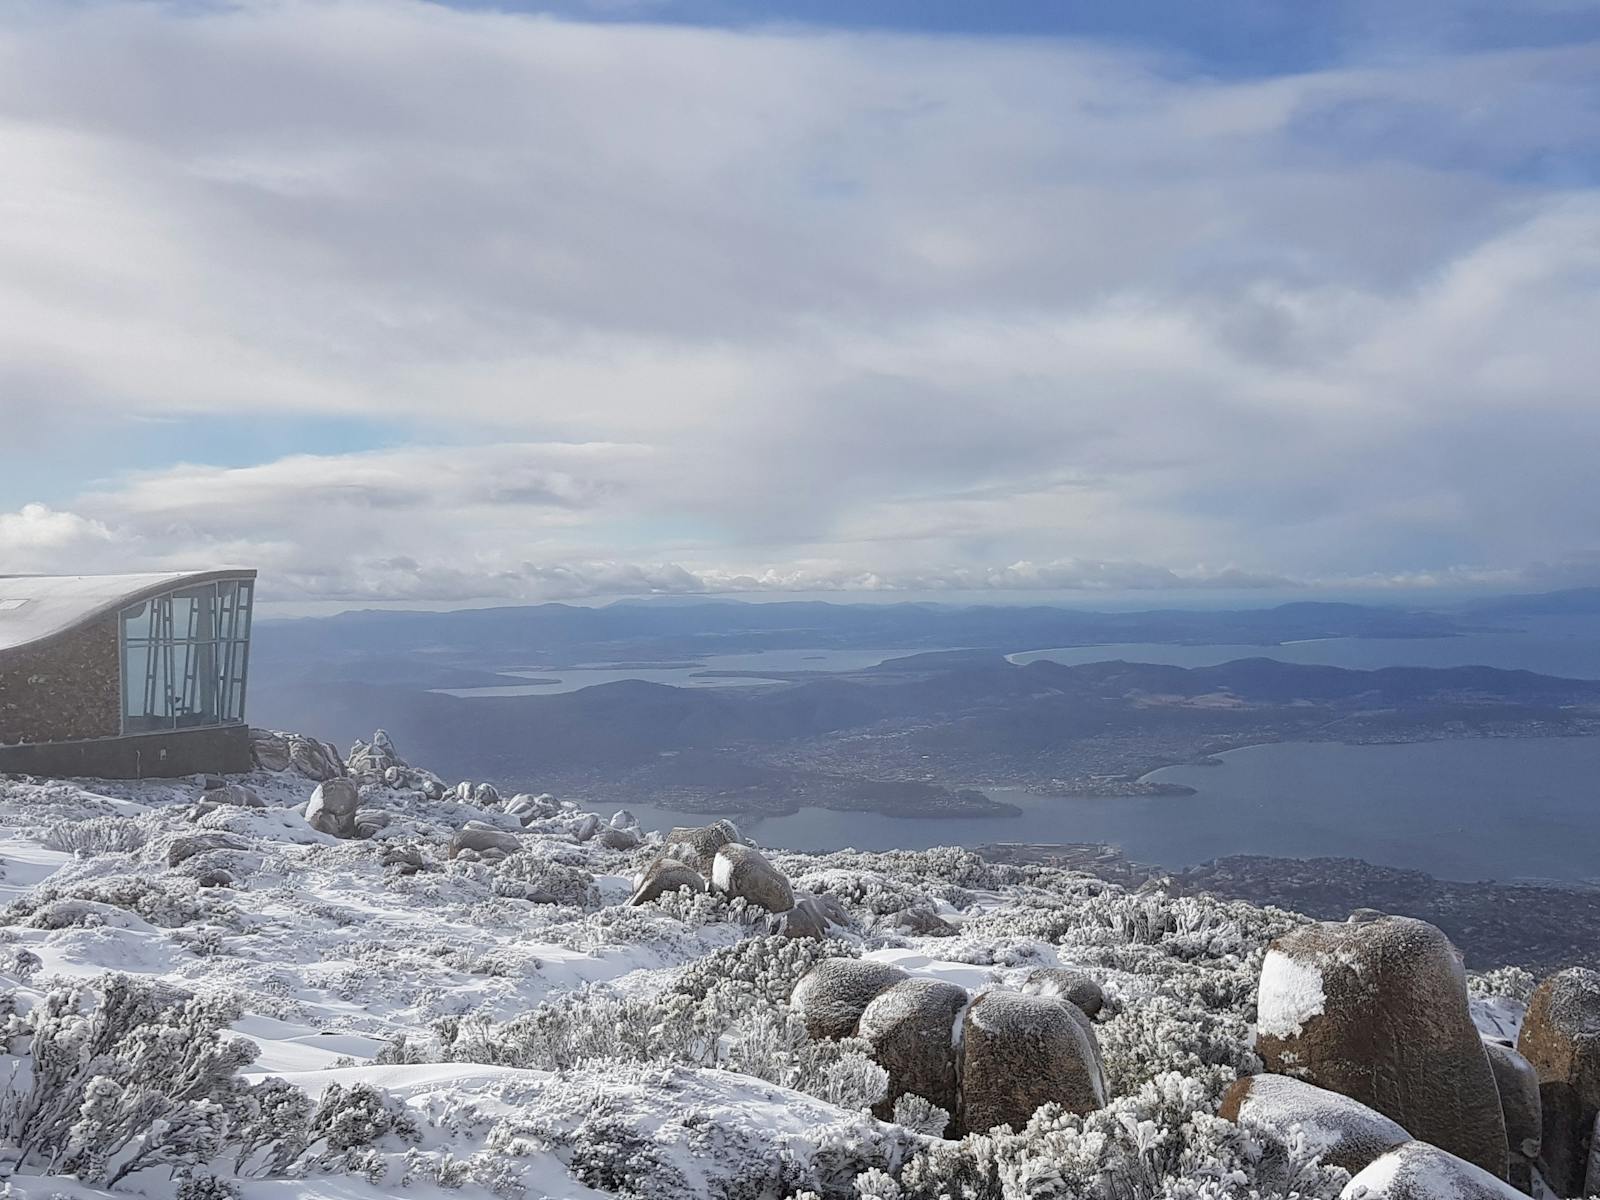 The summit of kunanyi/Mt Wellington covered in snow.